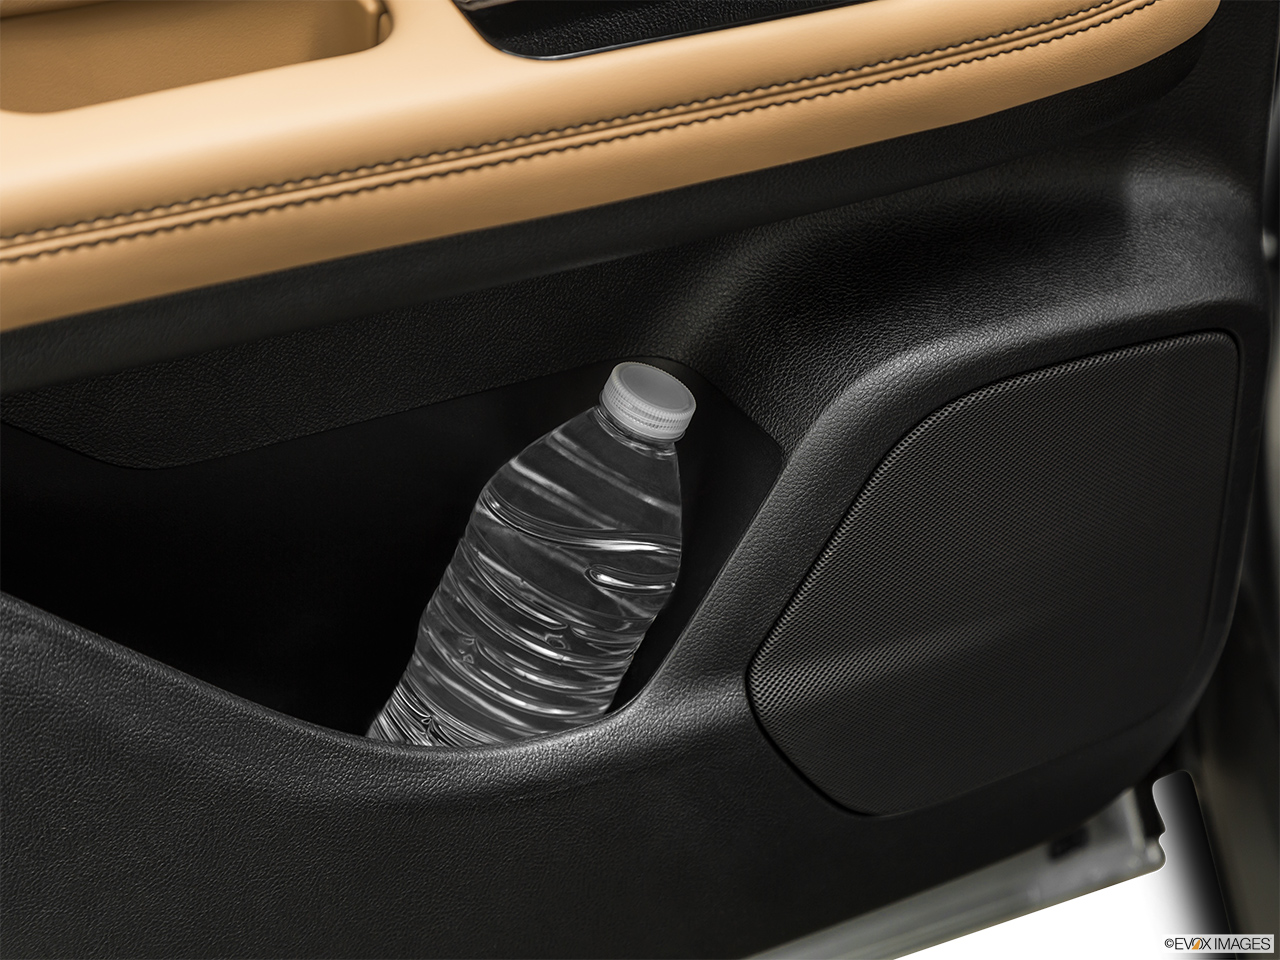 2020 Lincoln Corsair Reserve Second row side cup holder with coffee prop, or second row door cup holder with water bottle. 